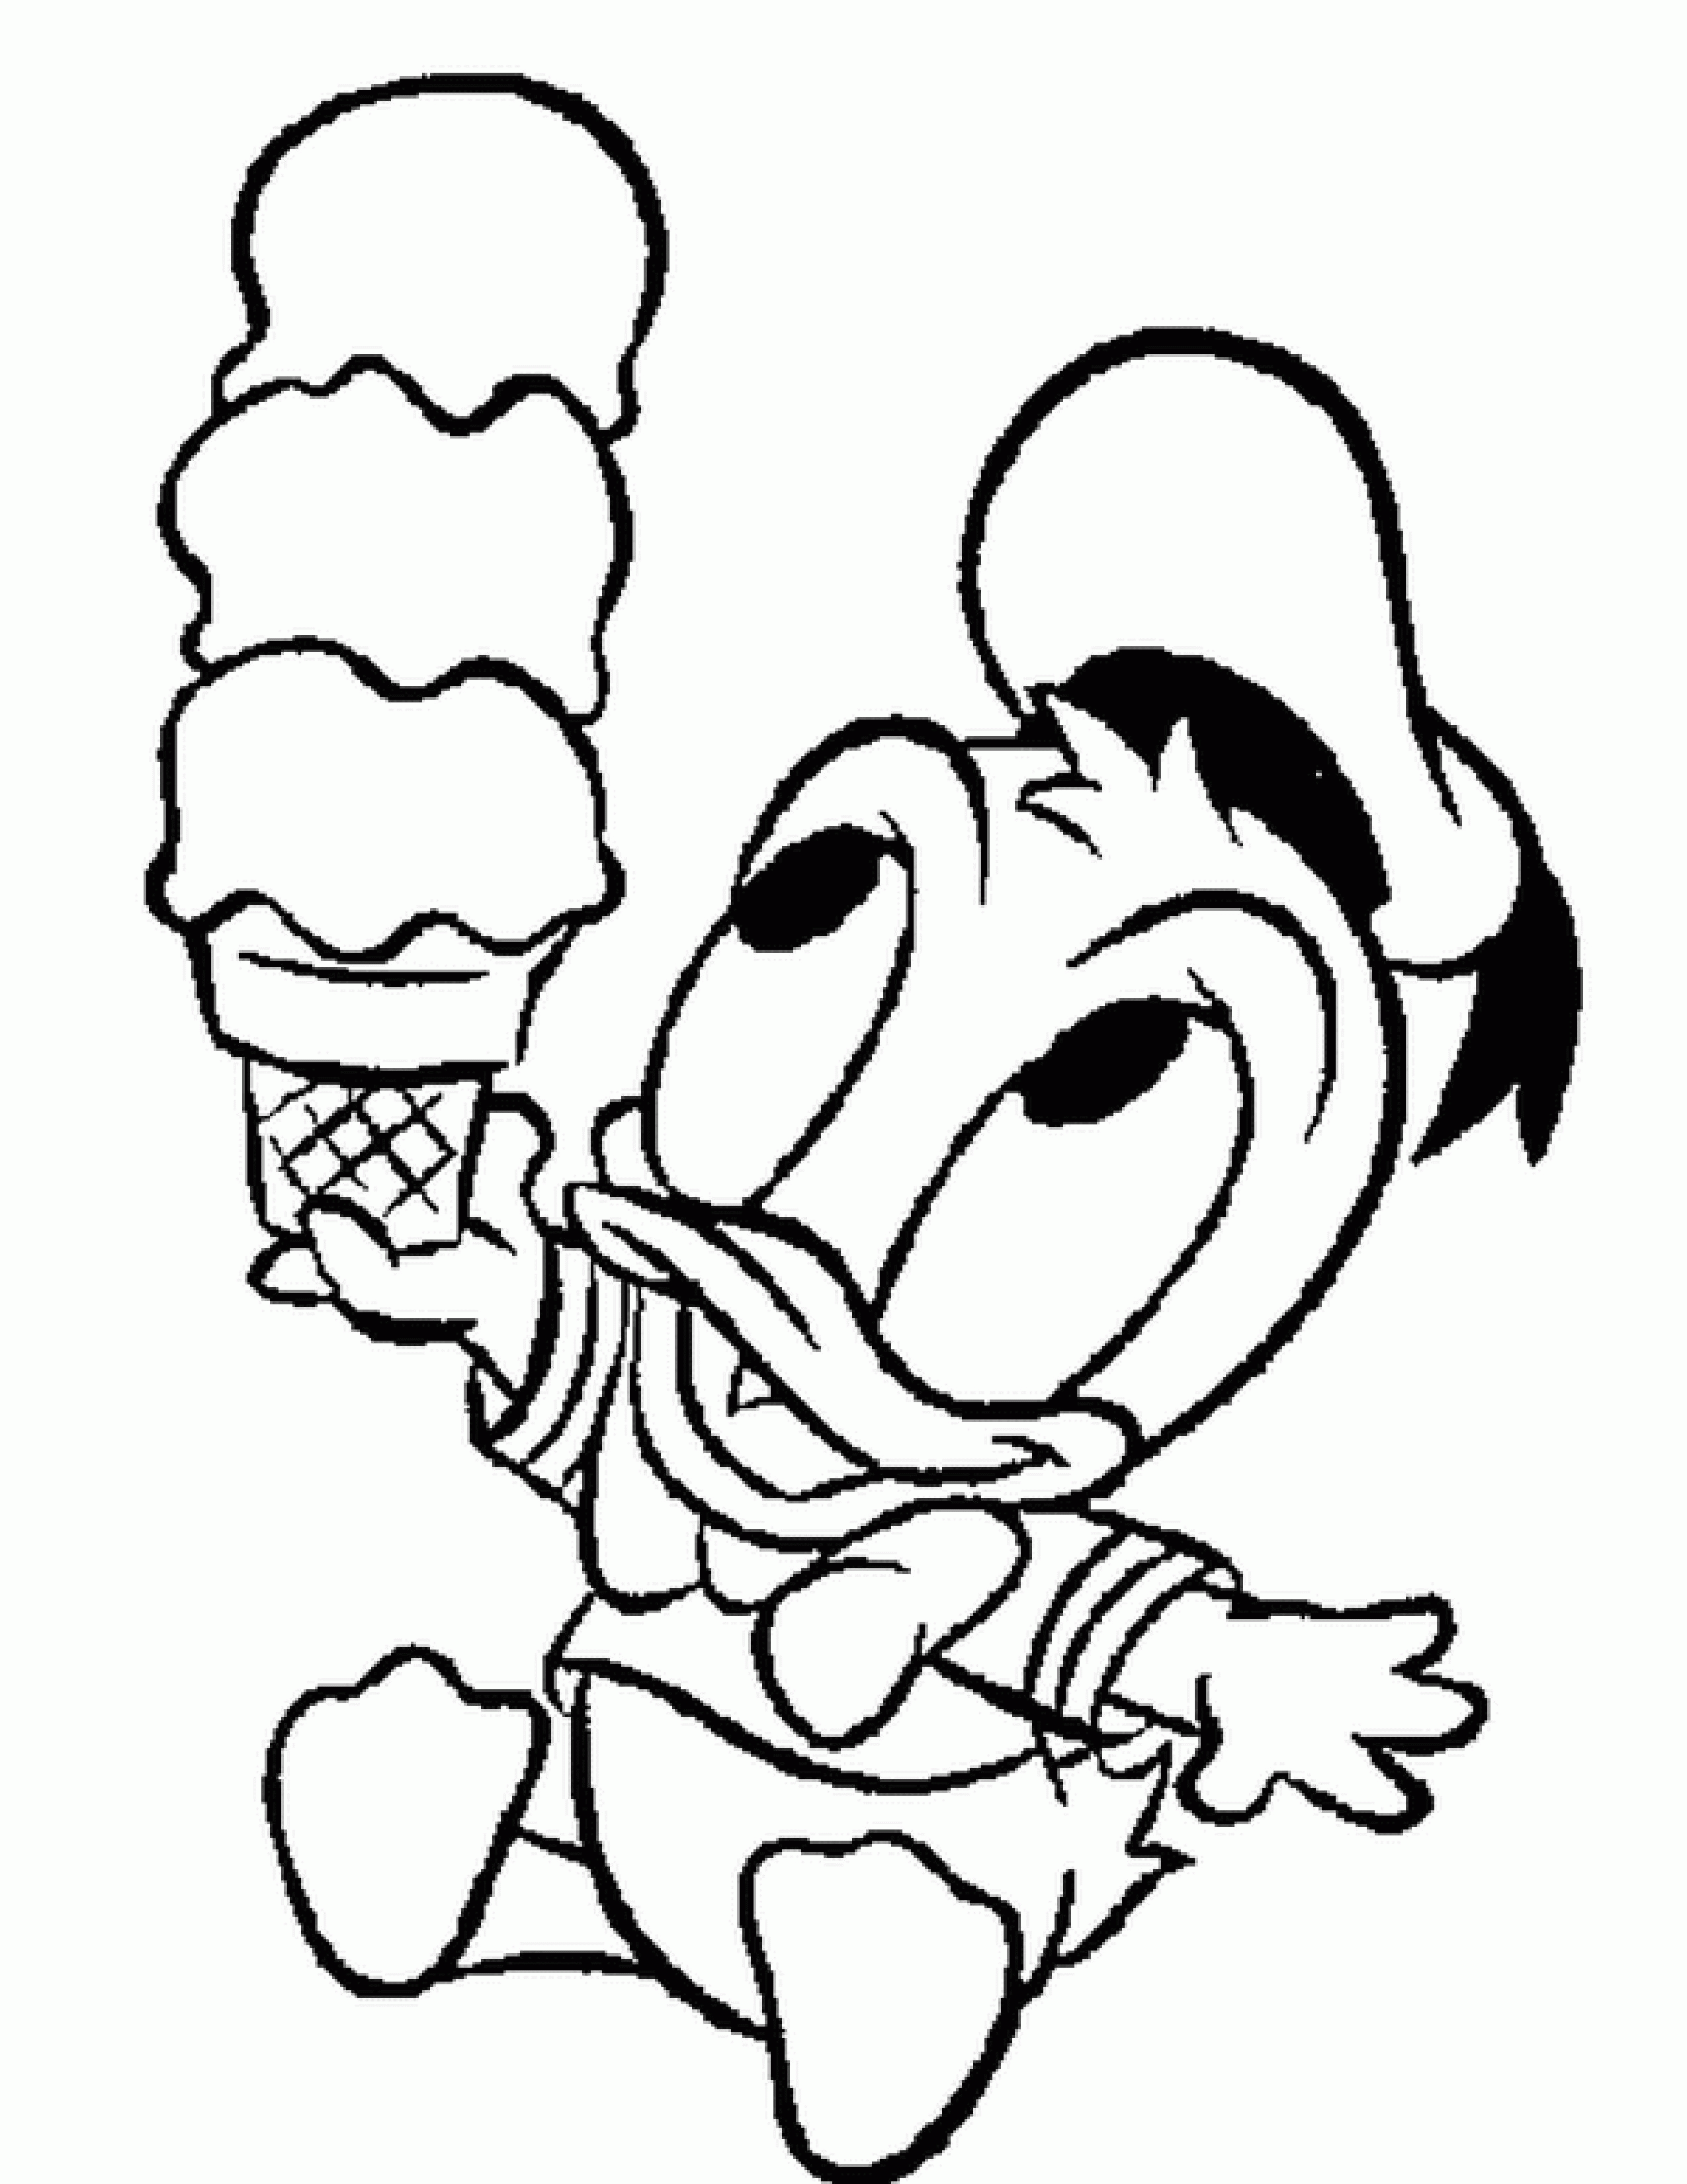 Walt Disney World Coloring Pages - Coloring Page Photos